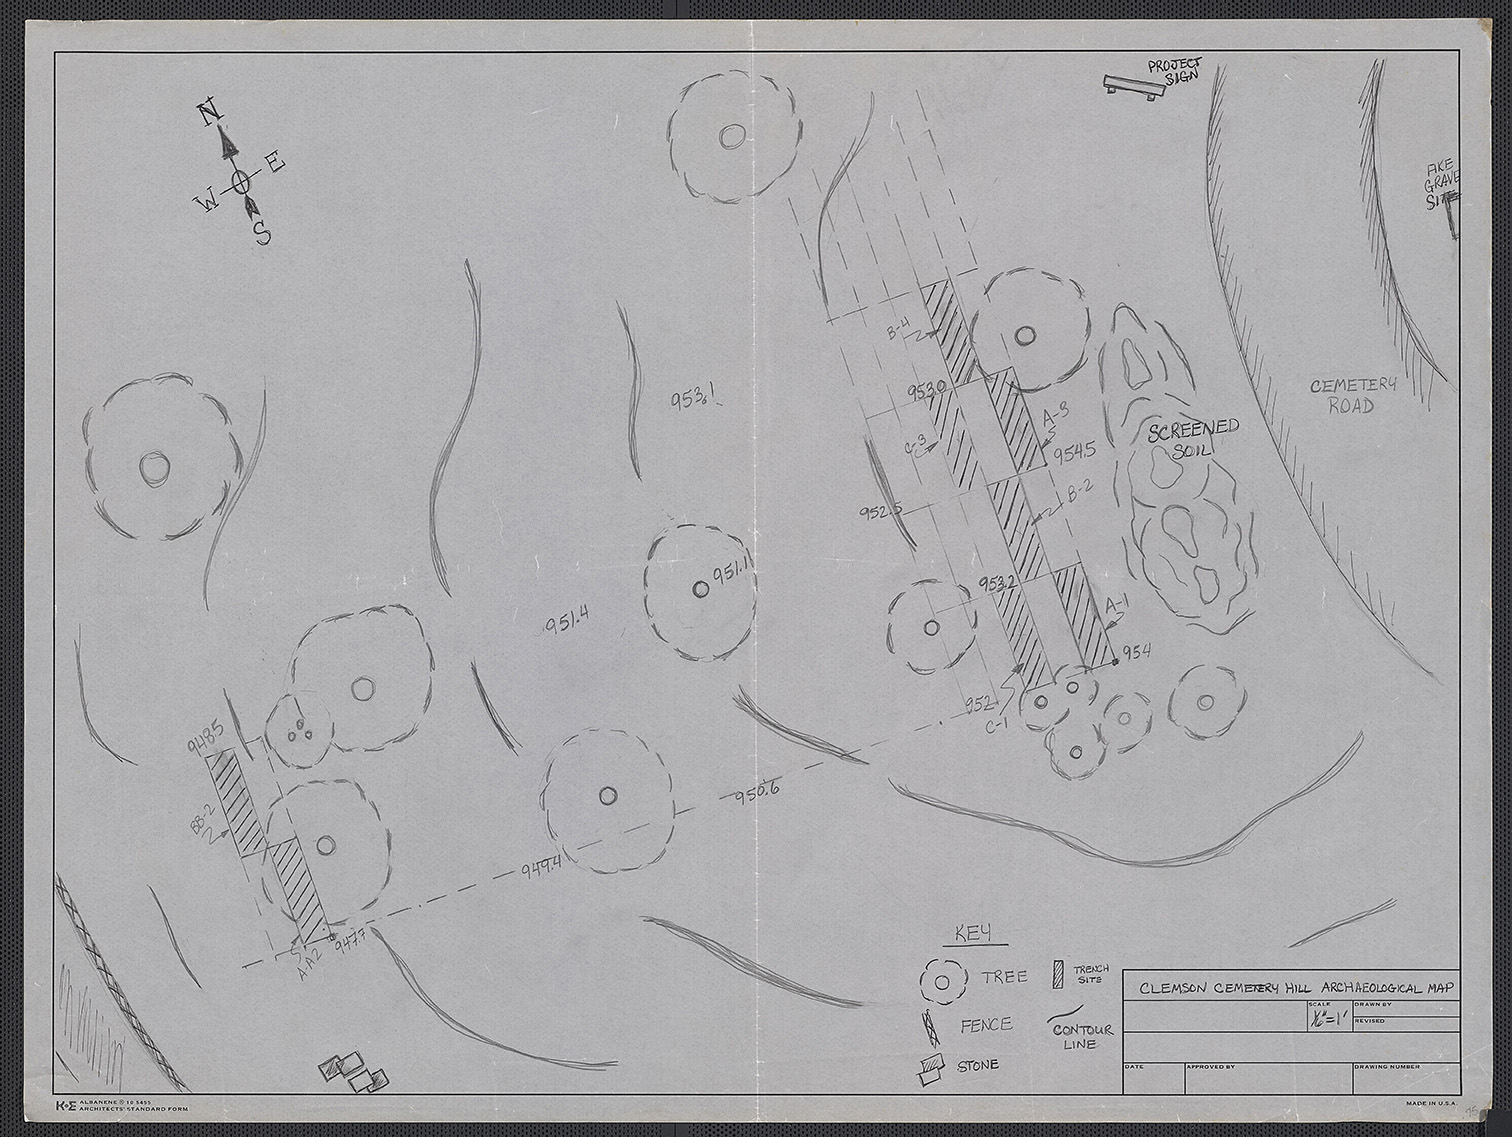 Survey map of the Cemetery Hill Archaeological Project by Carrel Cowan-Ricks in the early 1990s.